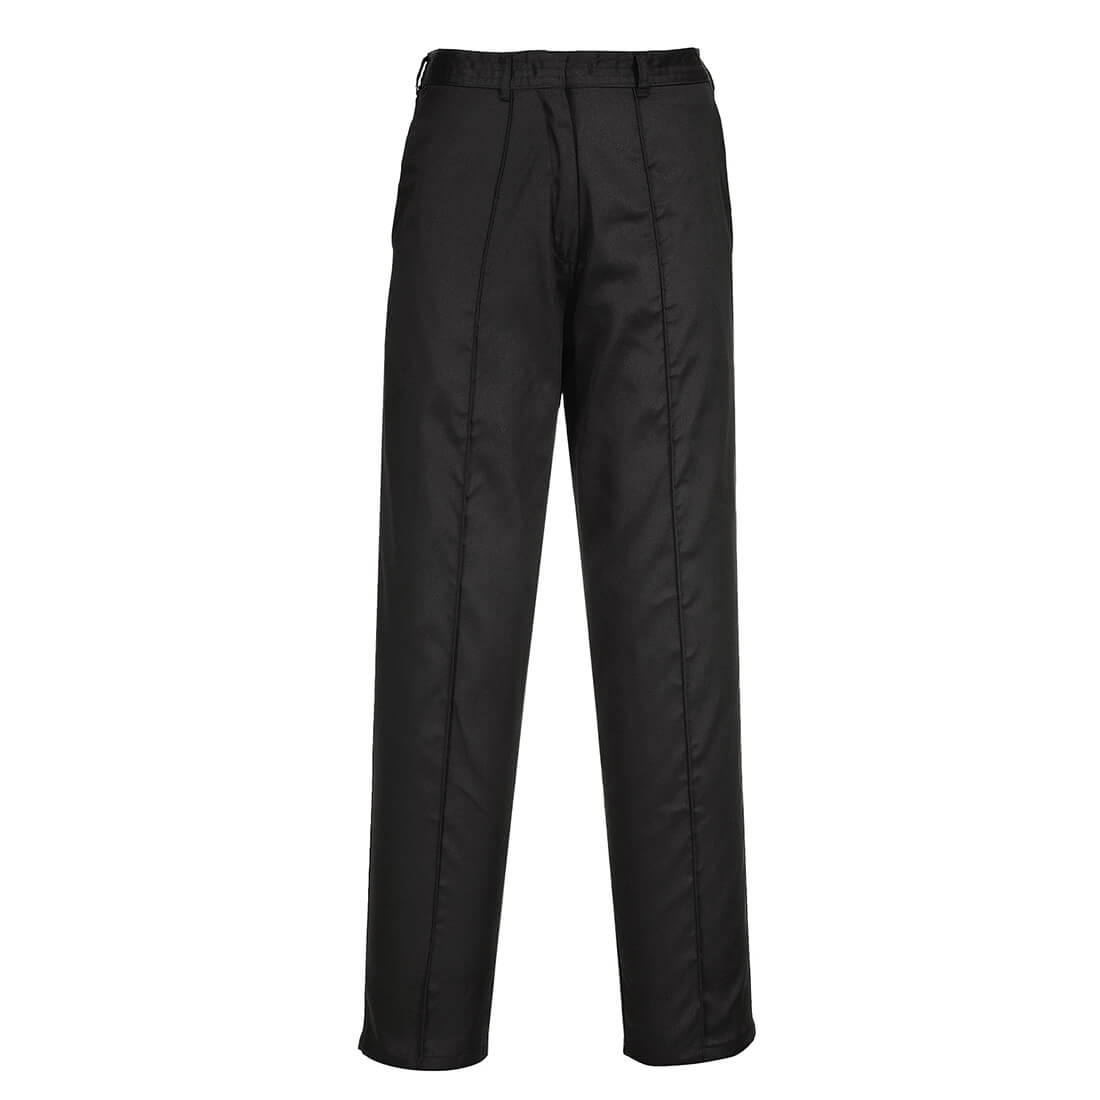 Image of Portwest LW97 ladies Elasticated Trousers Black 4XL 31"